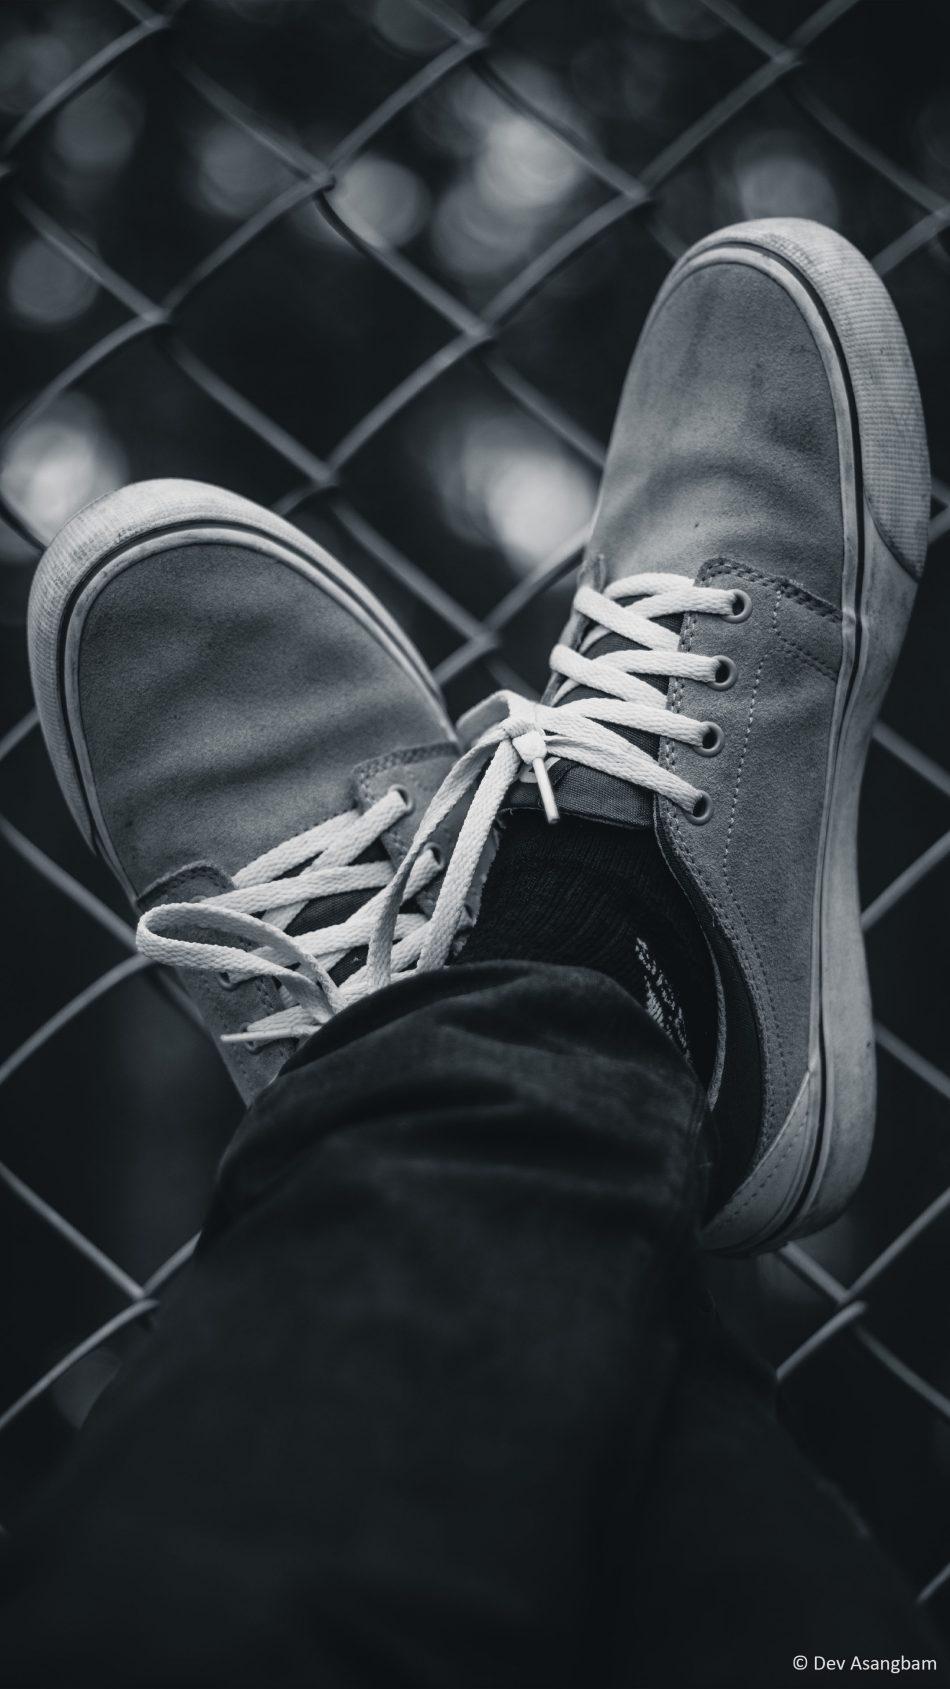 Sneakers Black & White Photography 4k Ultra HD Mobile